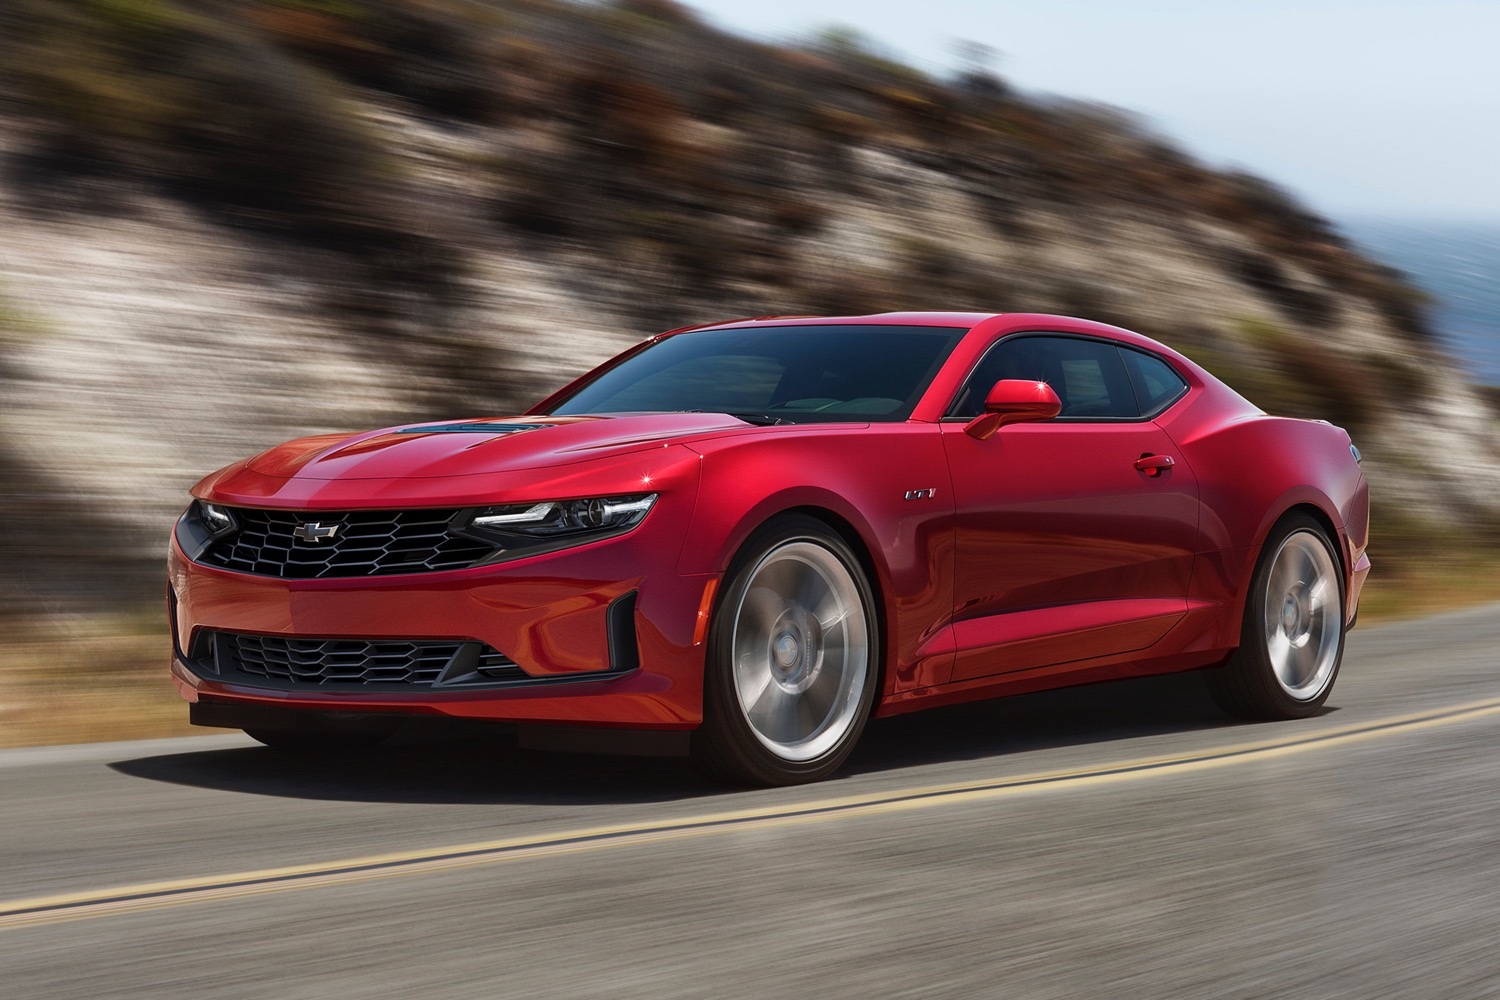 Chevy Camaro Lease From $299 Per Month In October 2021